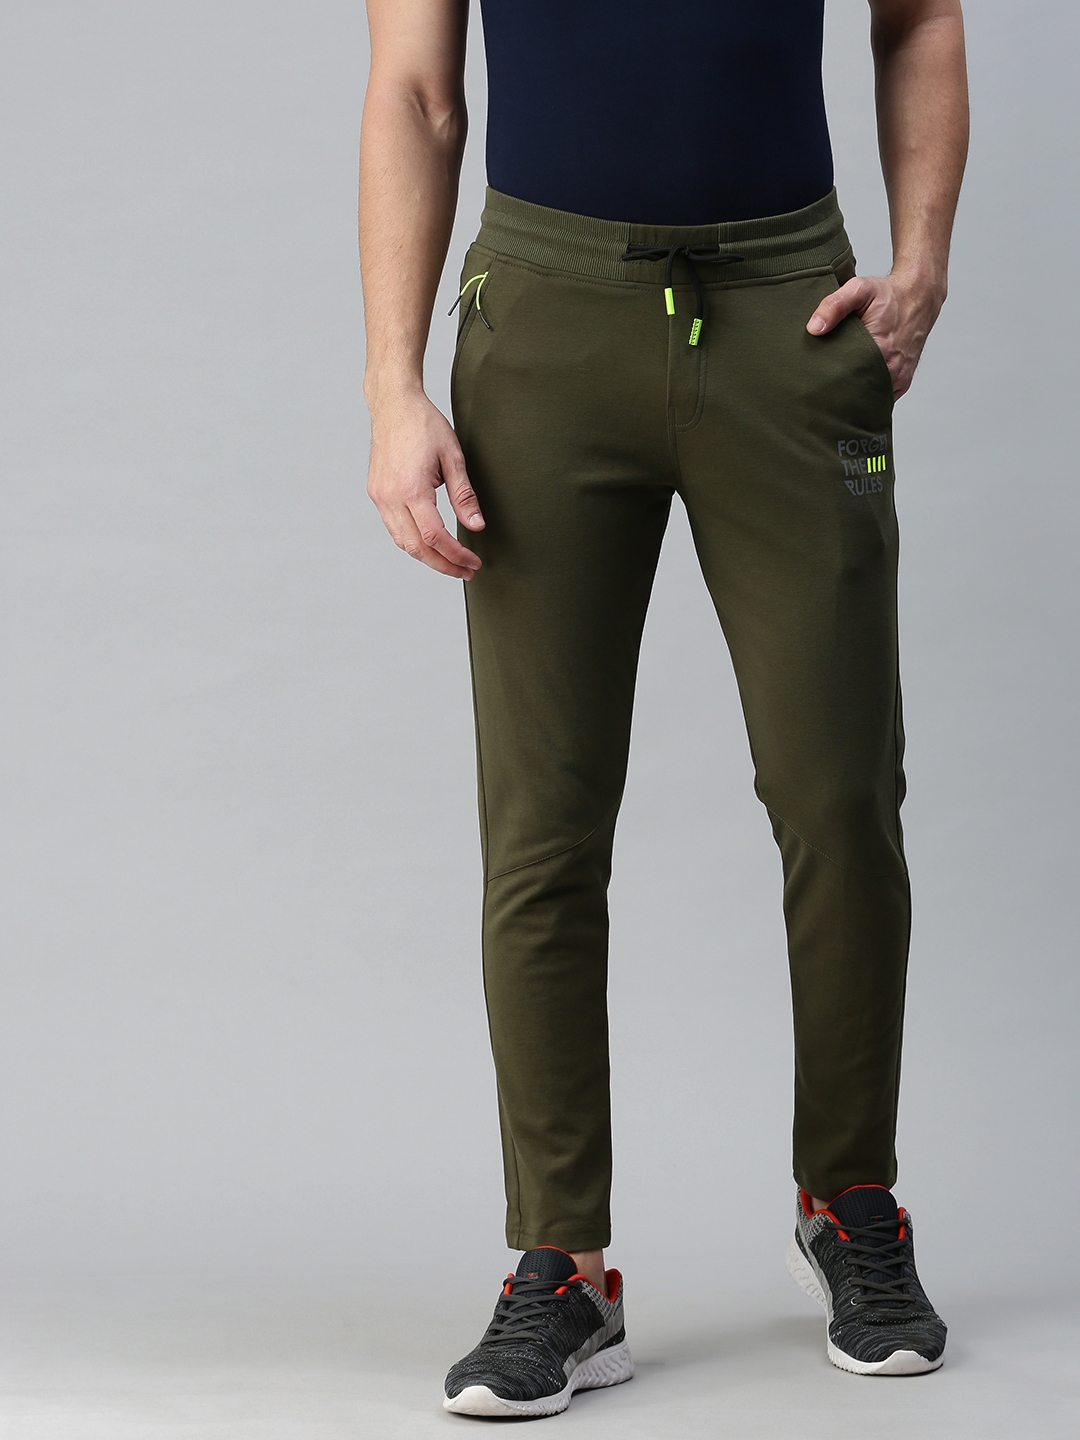 Khaki Solid Casual Cotton Trouser – Double Two